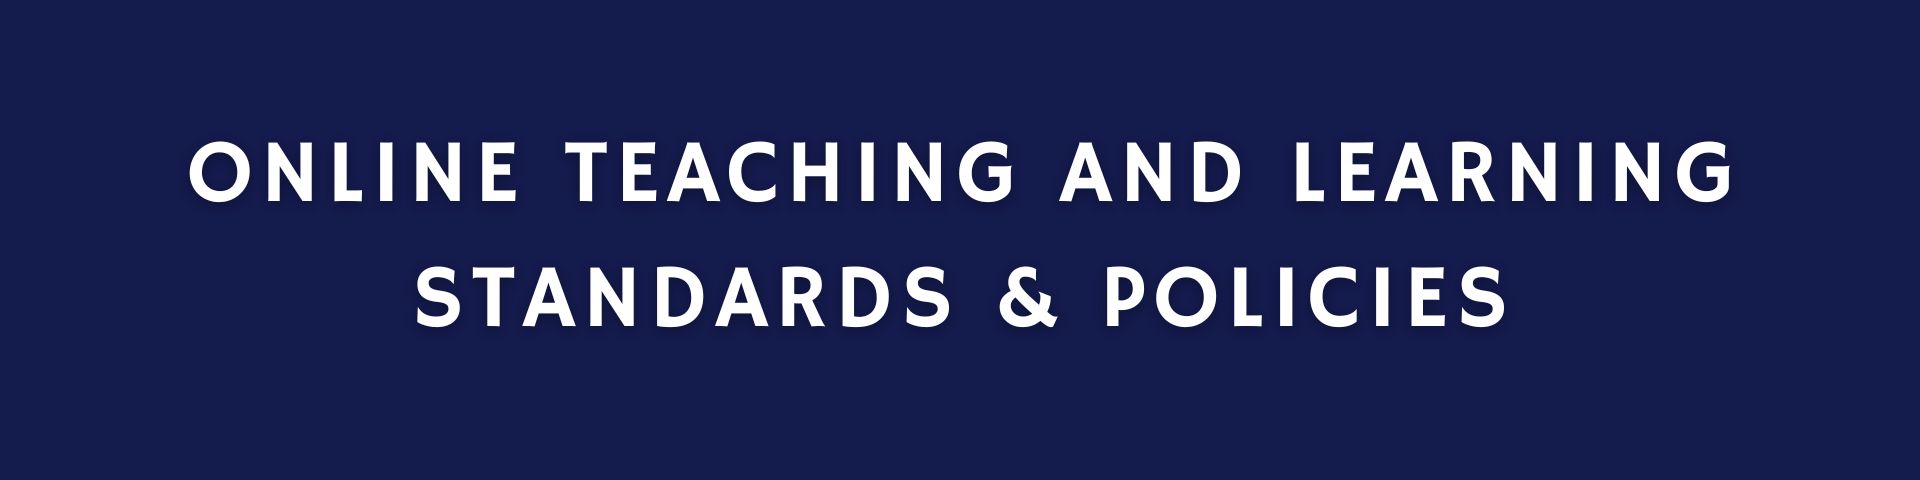 Online Teaching and Learning Standards & Policies